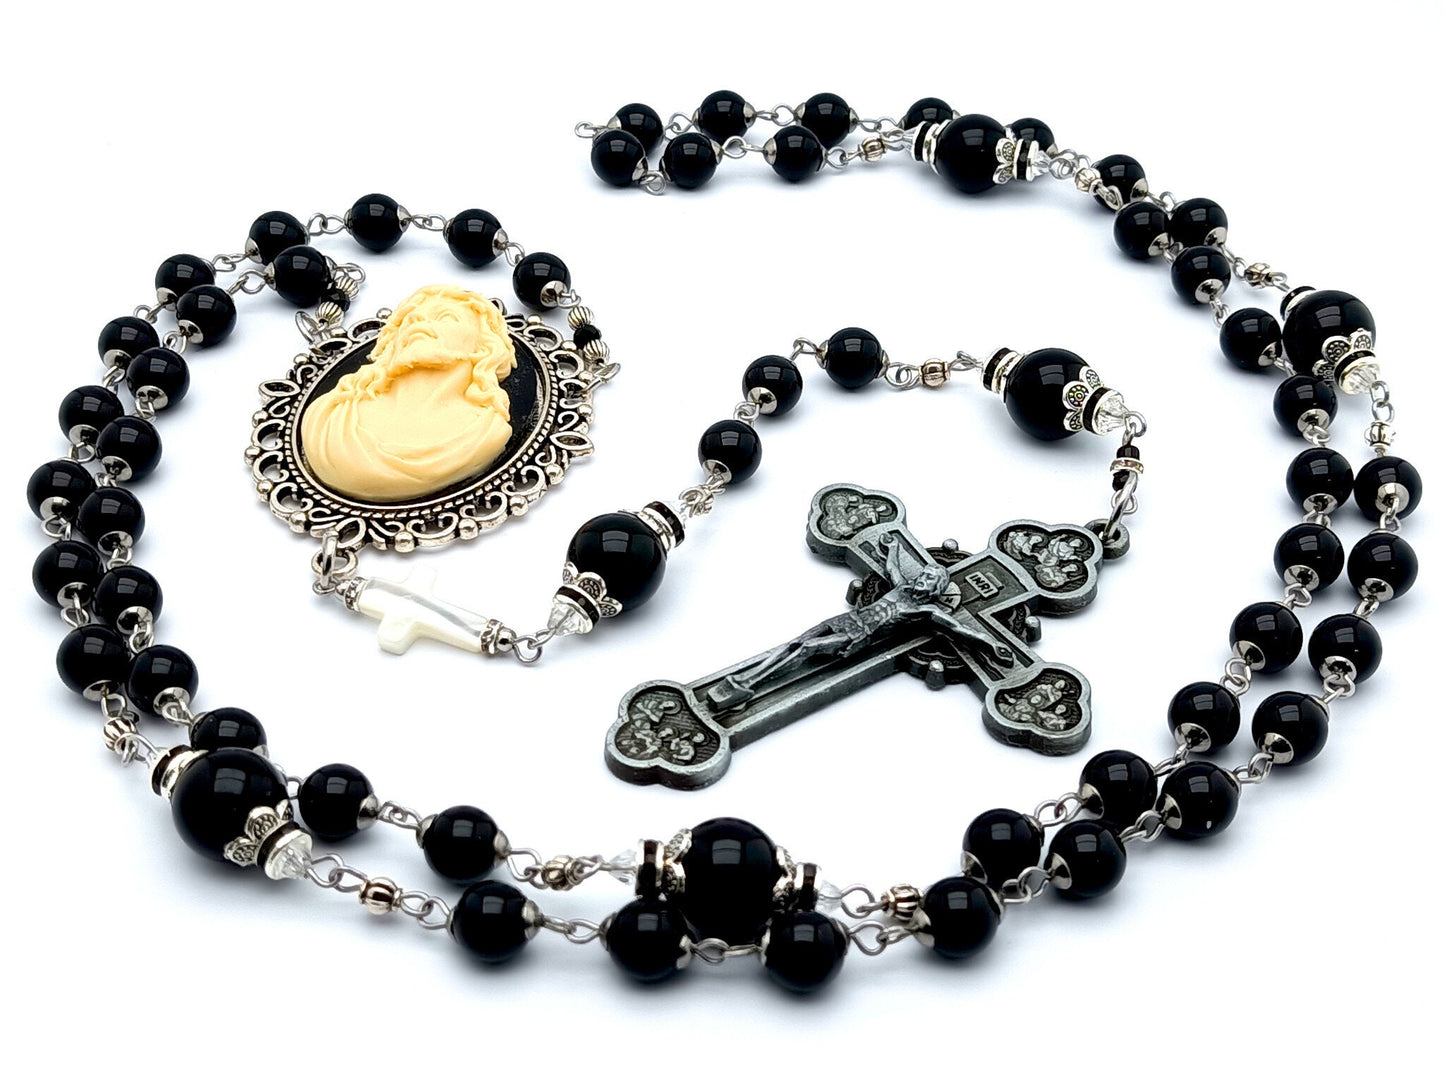 Crowning with Thorns cameo unique rosary beads onyx and Mother of pearl cross beads and Twelve Apostles crucifix.